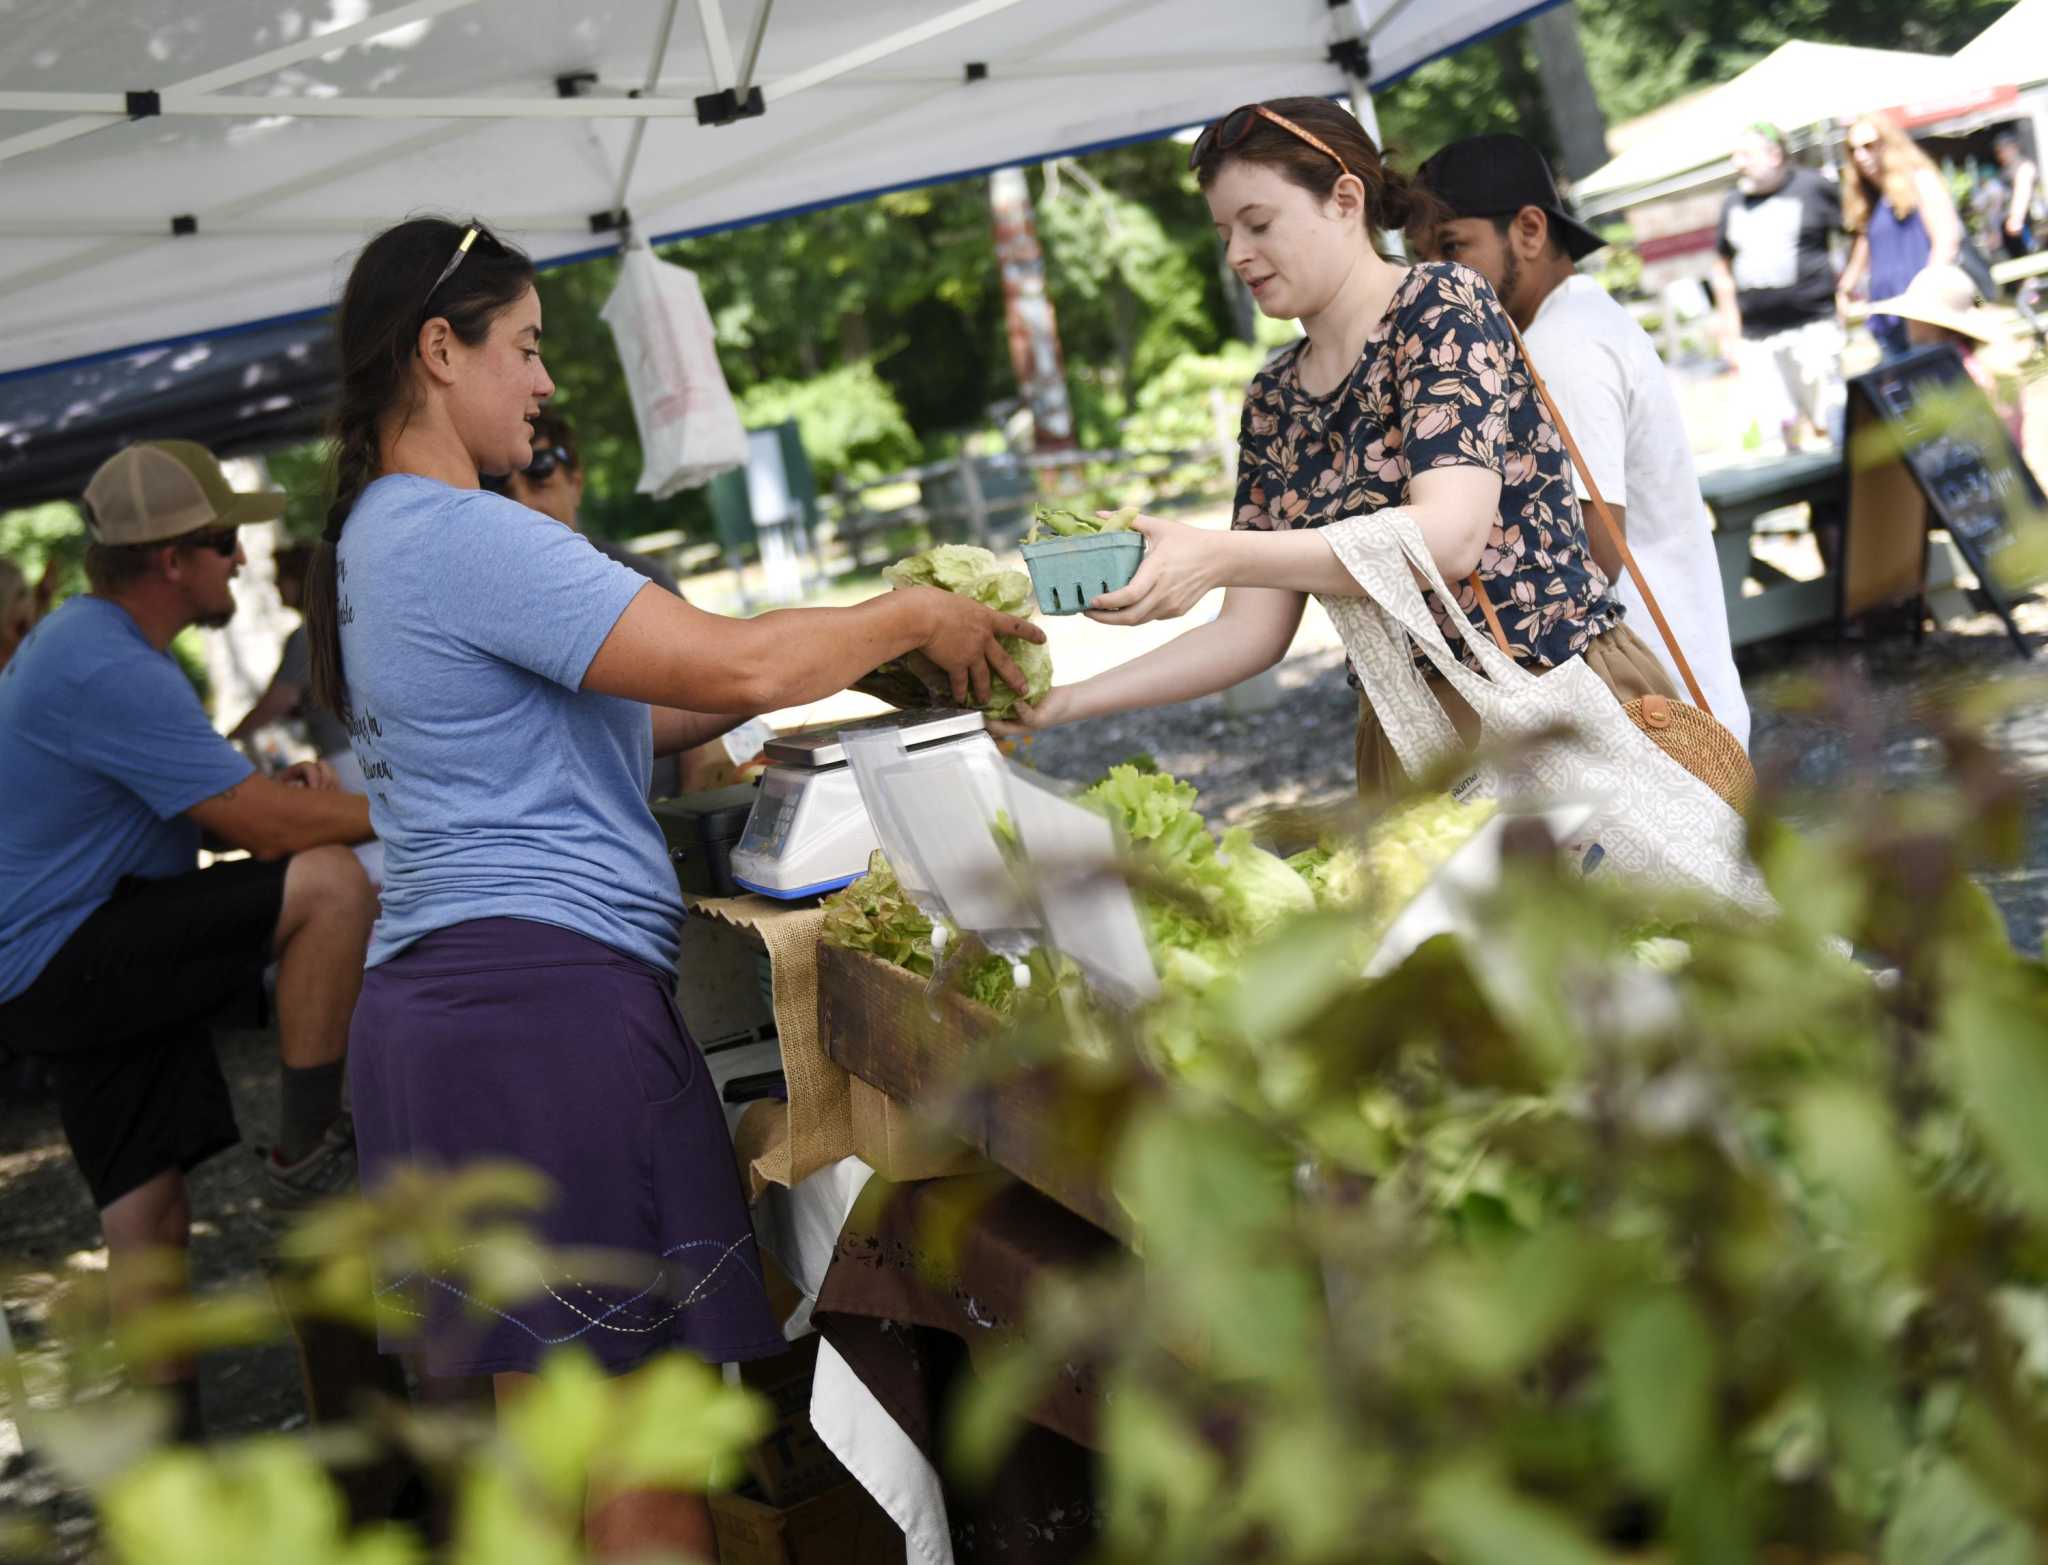 Stamford farmers markets try to stand out